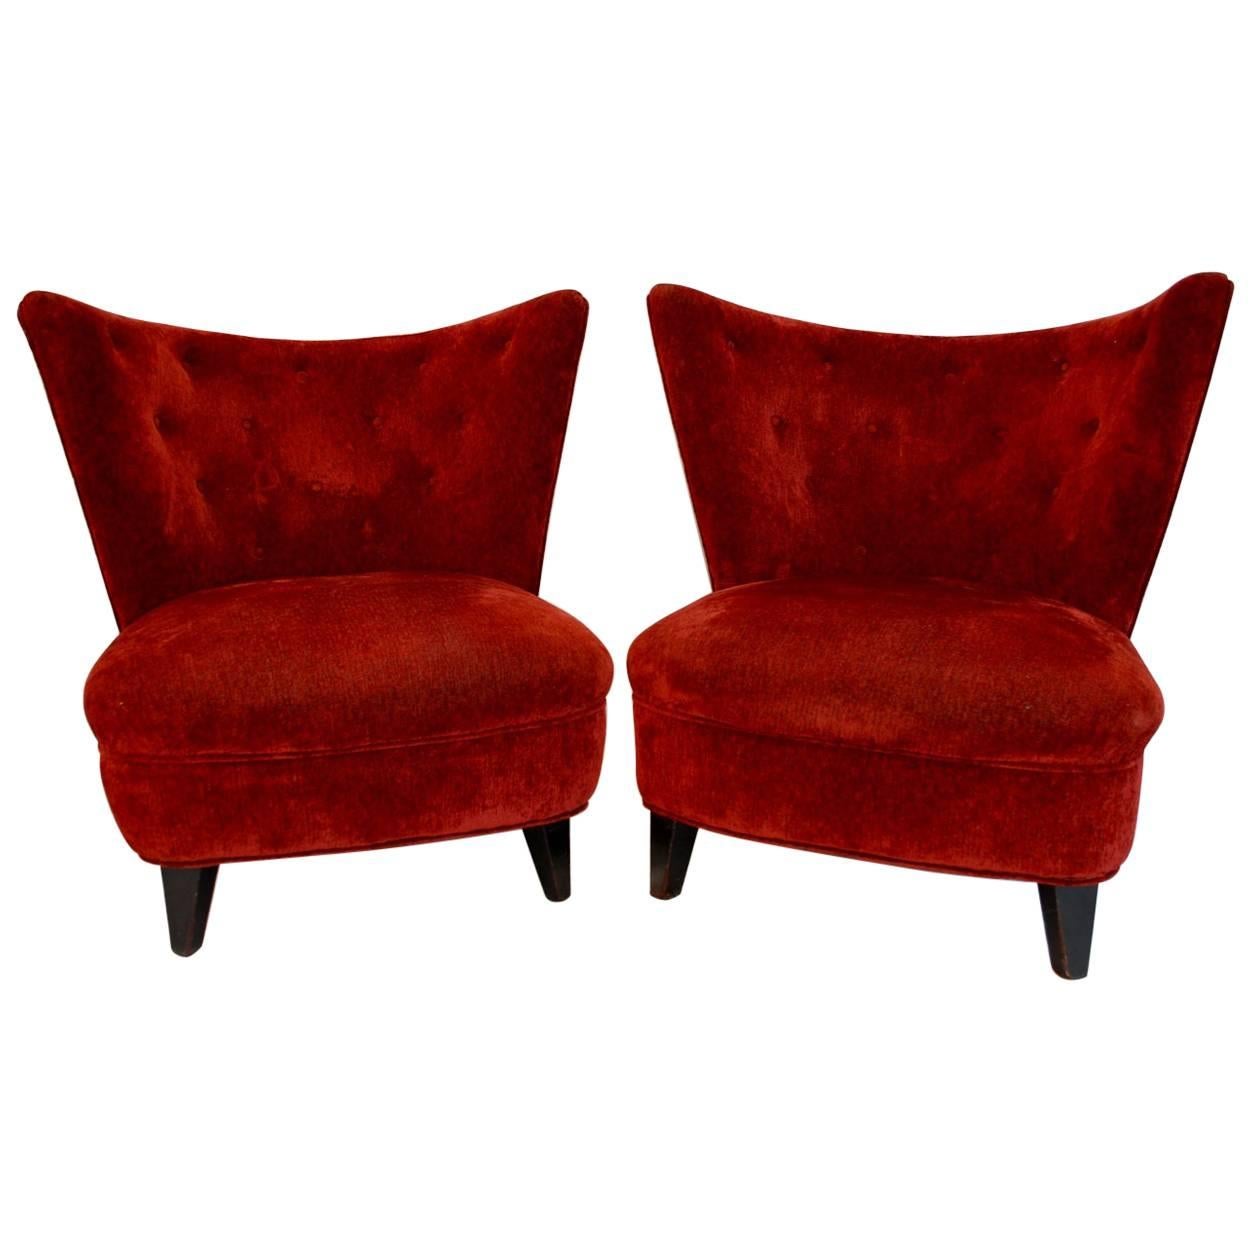 Glamorous Pair of 1940 Lounge Slipper Chairs by Gilbert Rohde